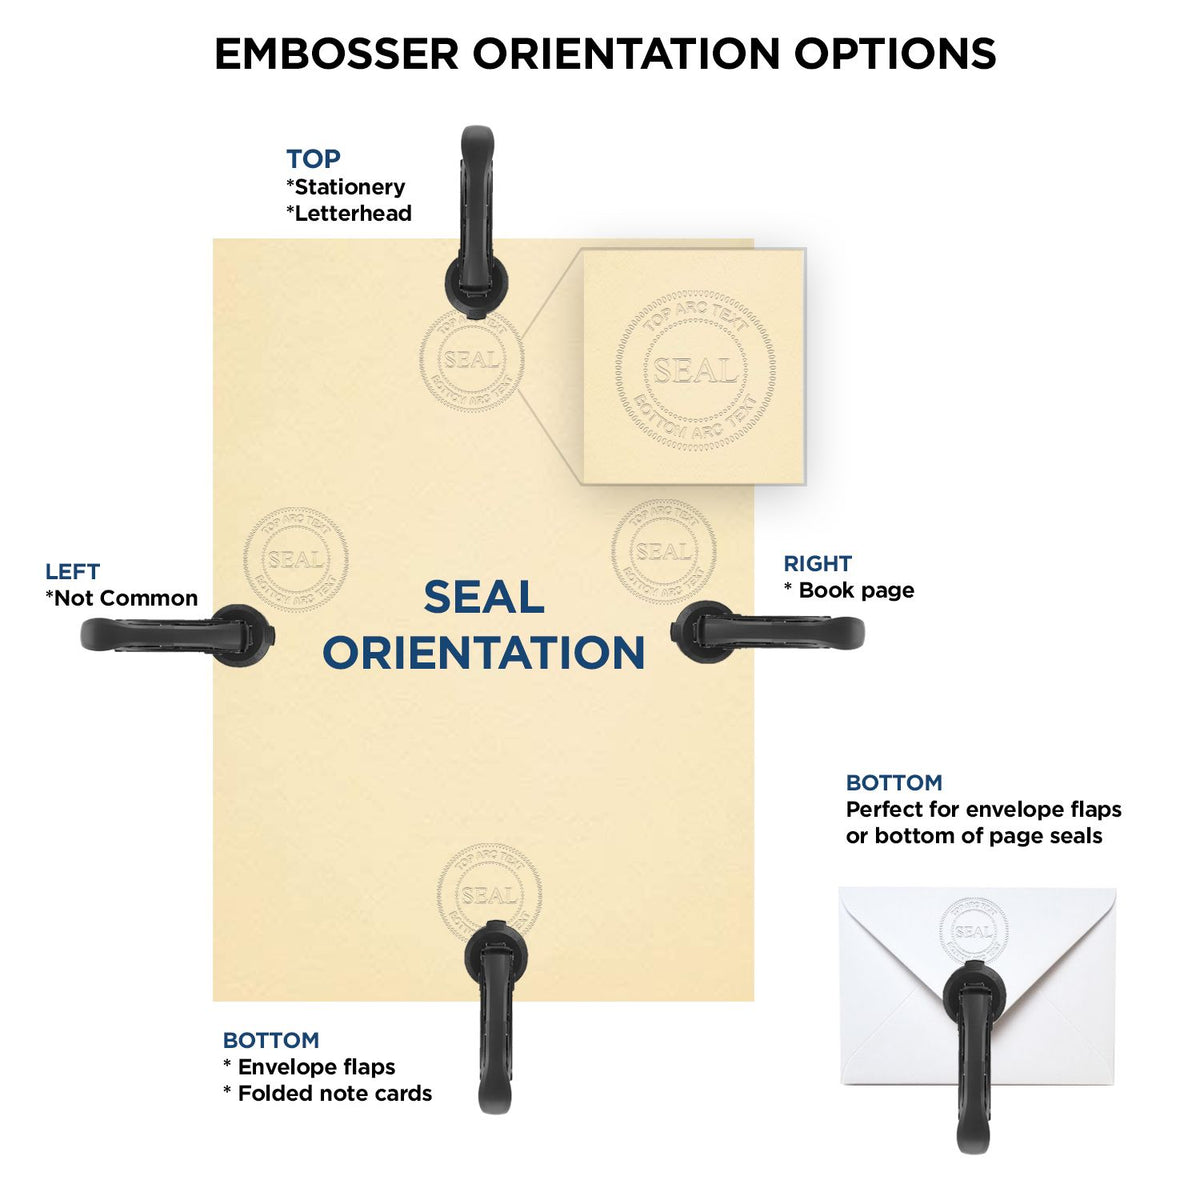 An infographic for the Kentucky Geologist Desk Seal showing embosser orientation, this is showing examples of a top, bottom, right and left insert.